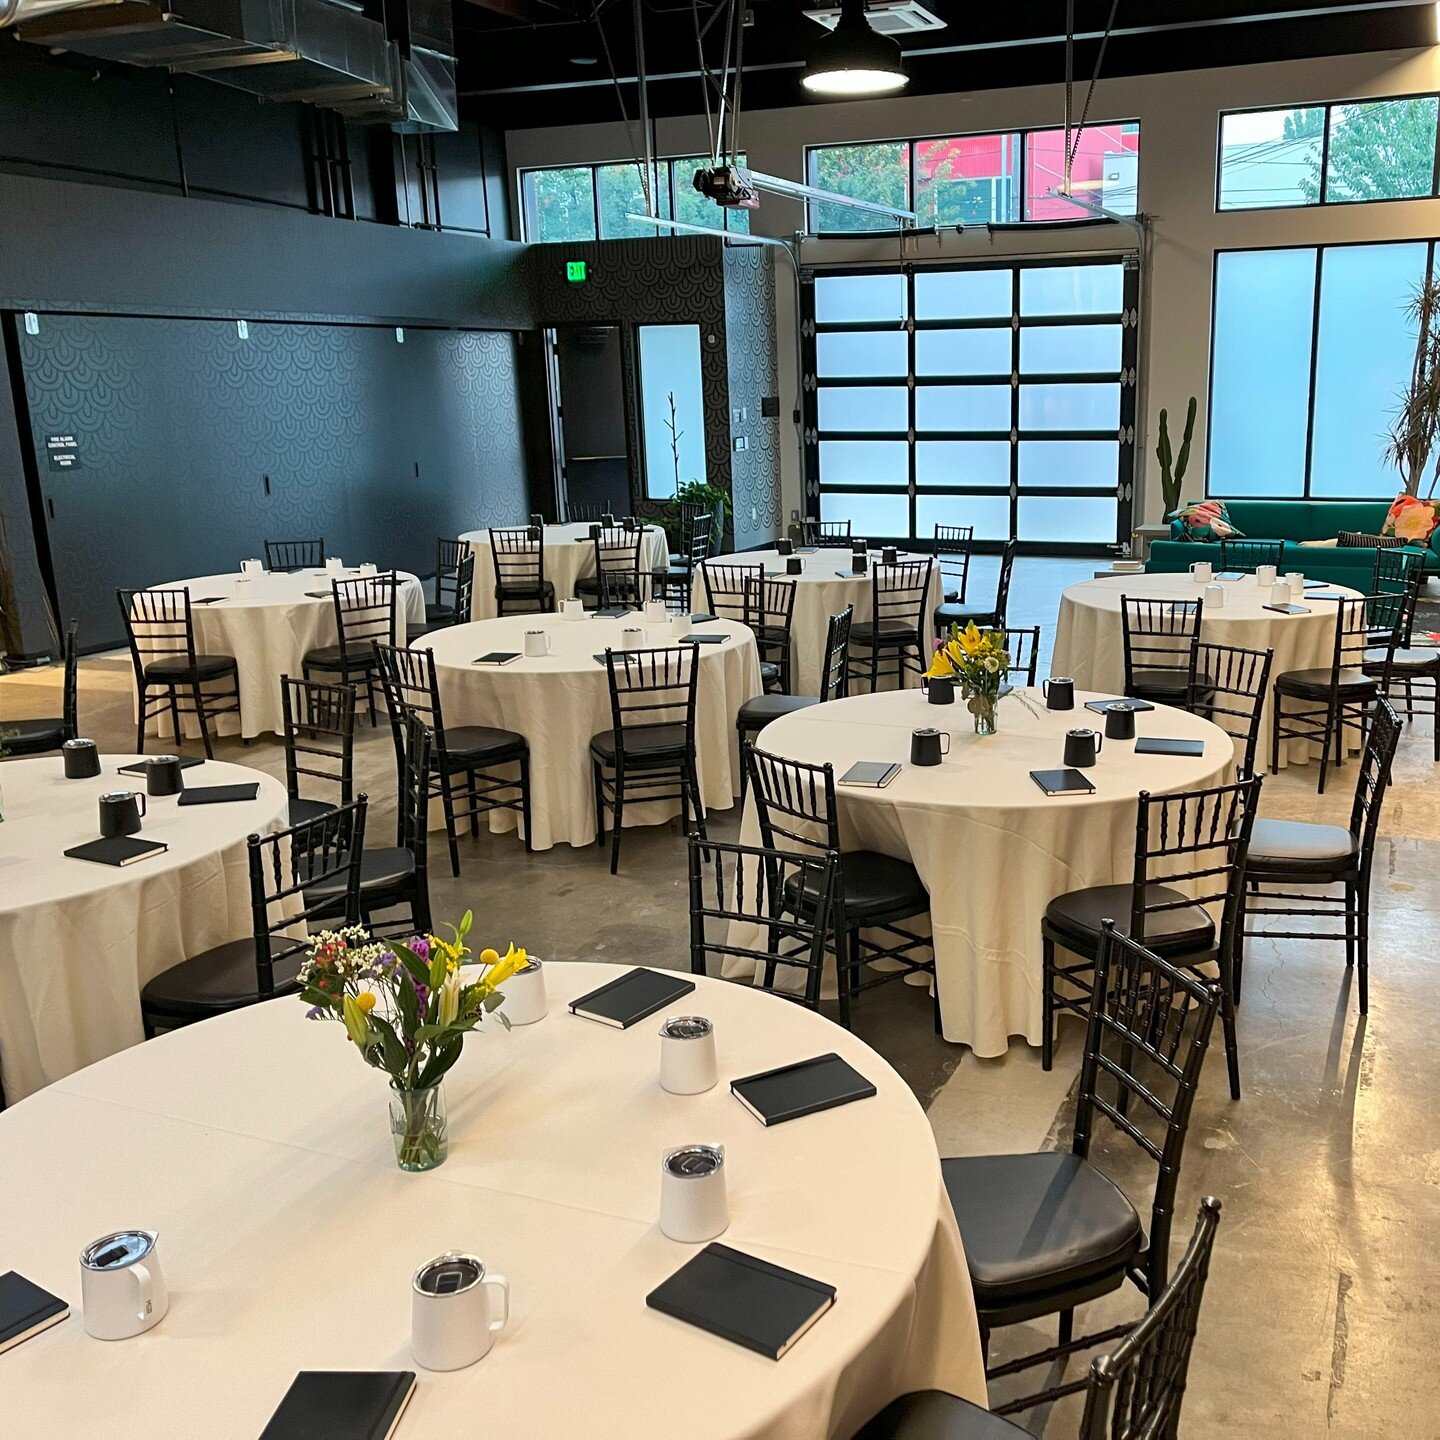 Are you looking for a new venue for your fundraiser, awards presentation or corporate training? It&rsquo;s a great setup for taking notes, viewing a presentation, and dining. Take a tour at Stone Way Auto to learn how to make your personalized meetin